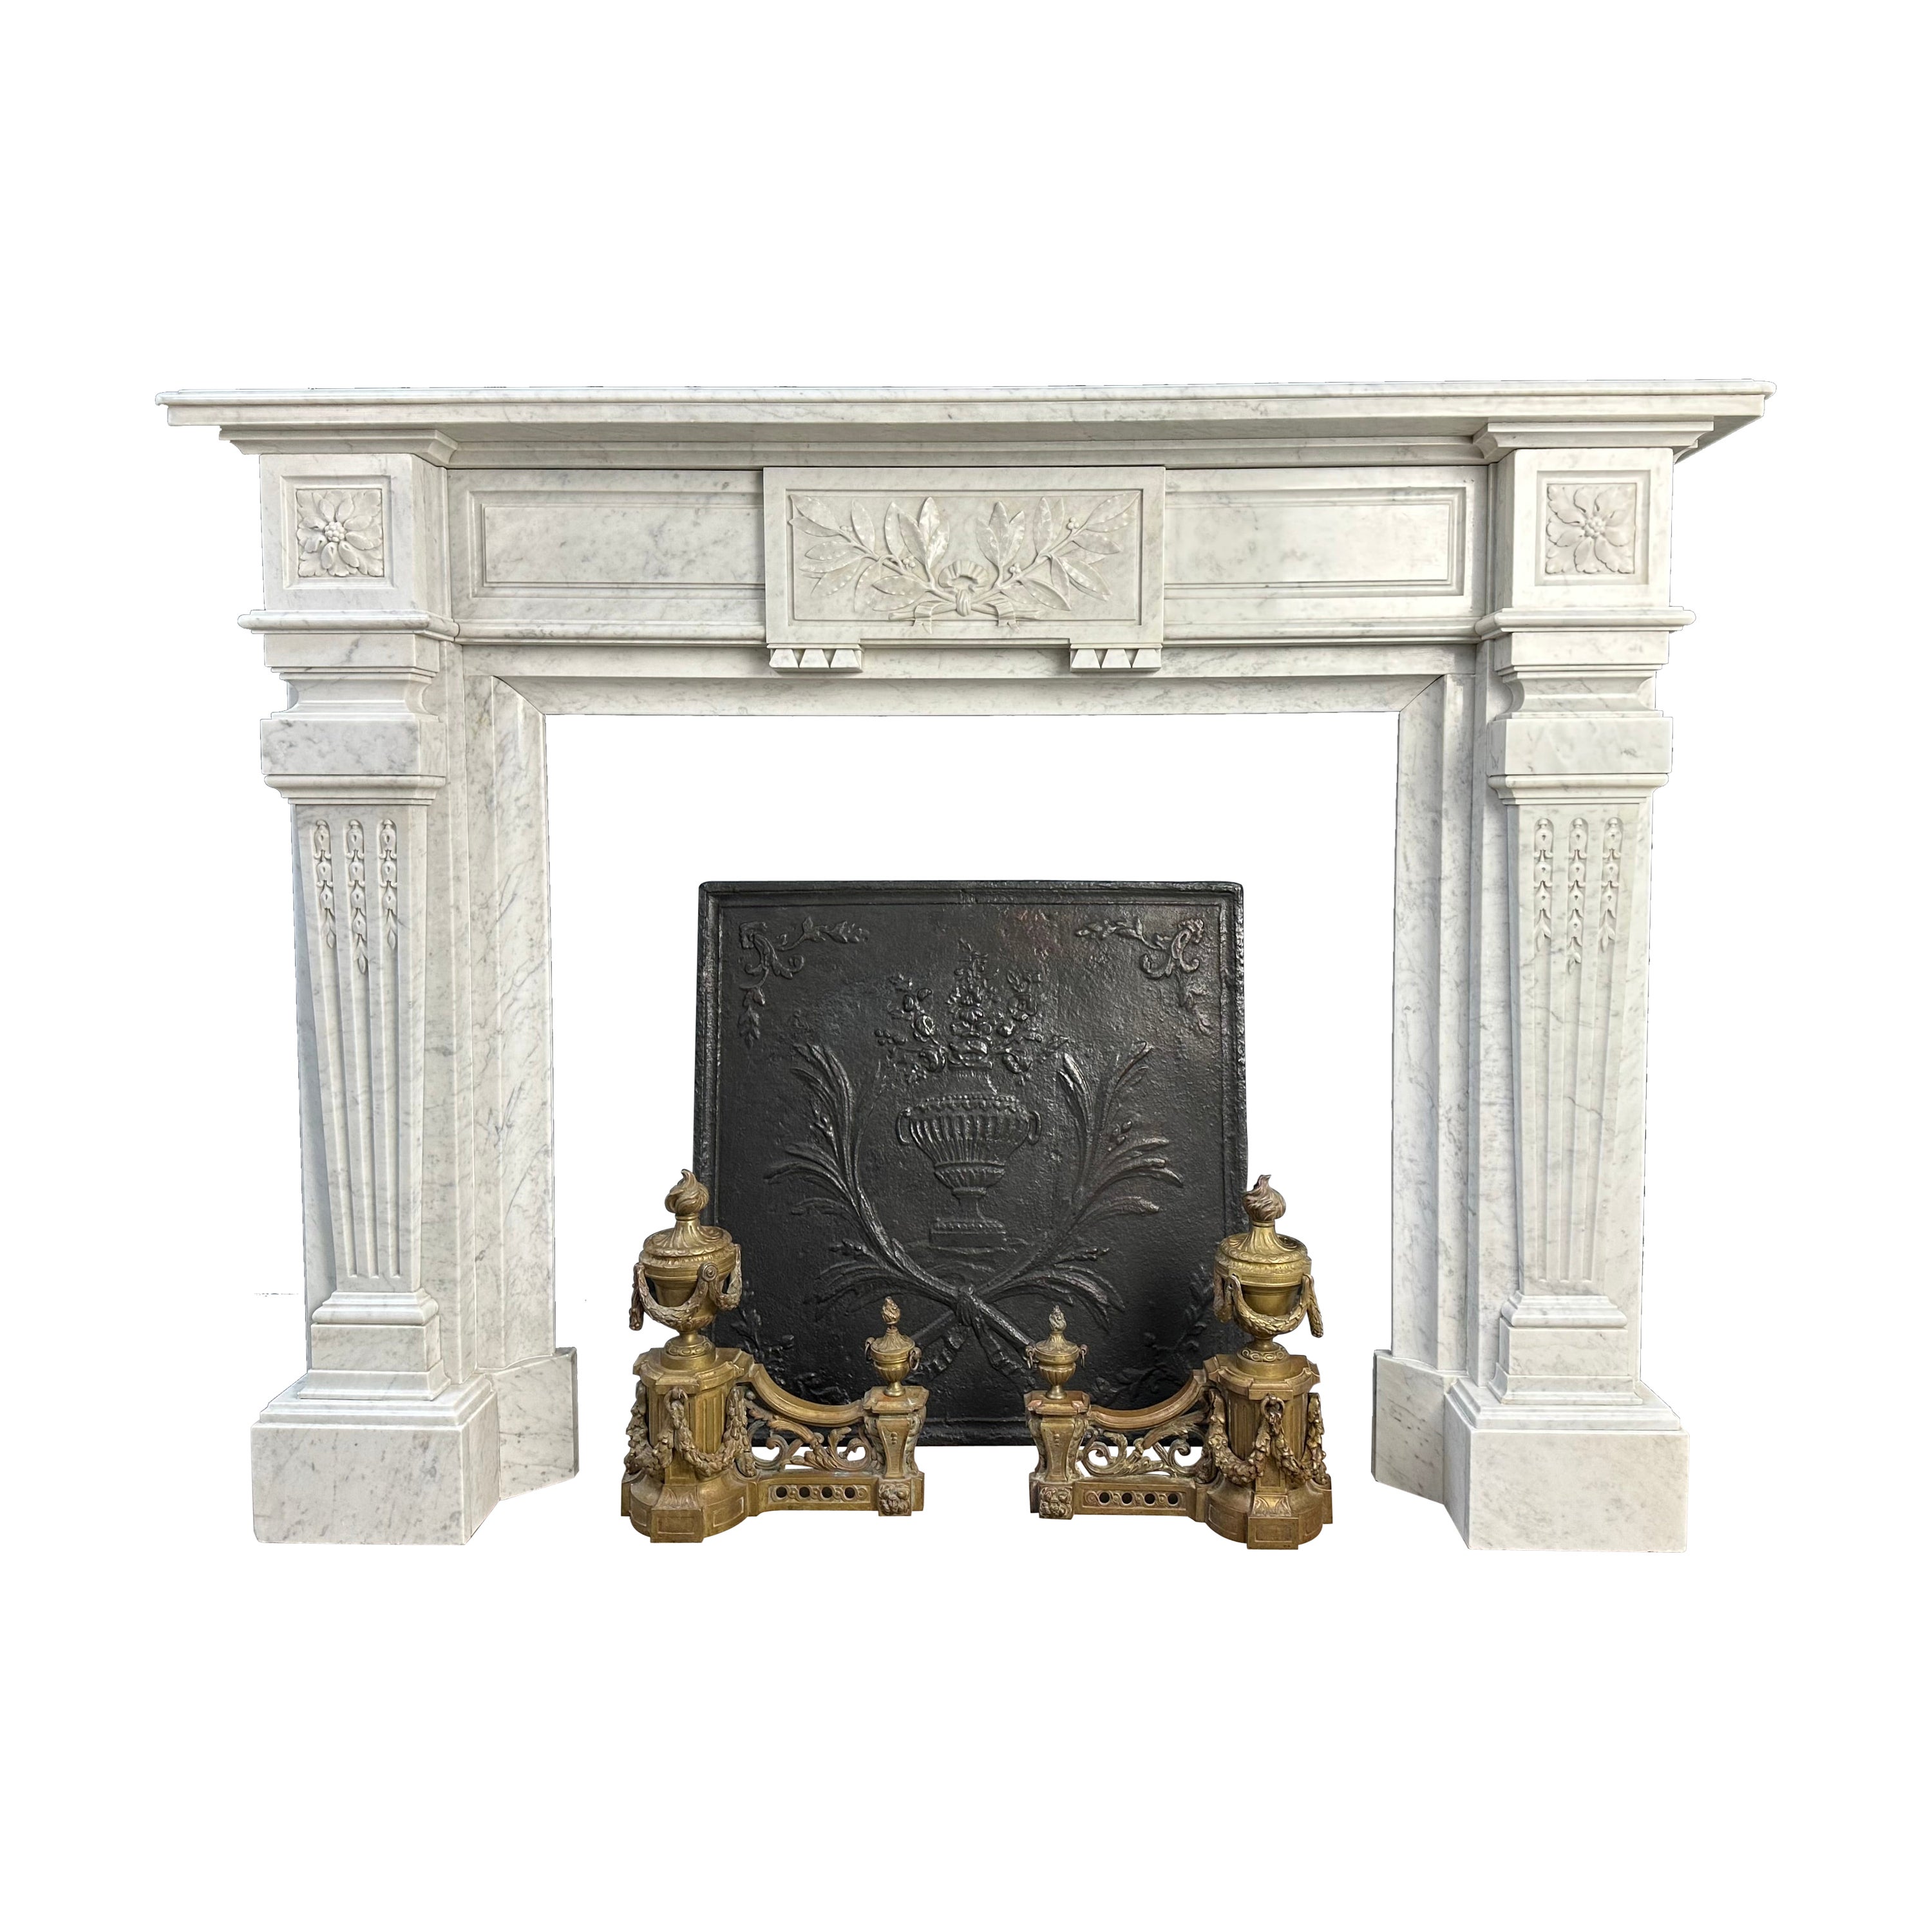 Beautiful Carrara Marble Antique Fireplace Surround Empire Style *Free Shipping For Sale